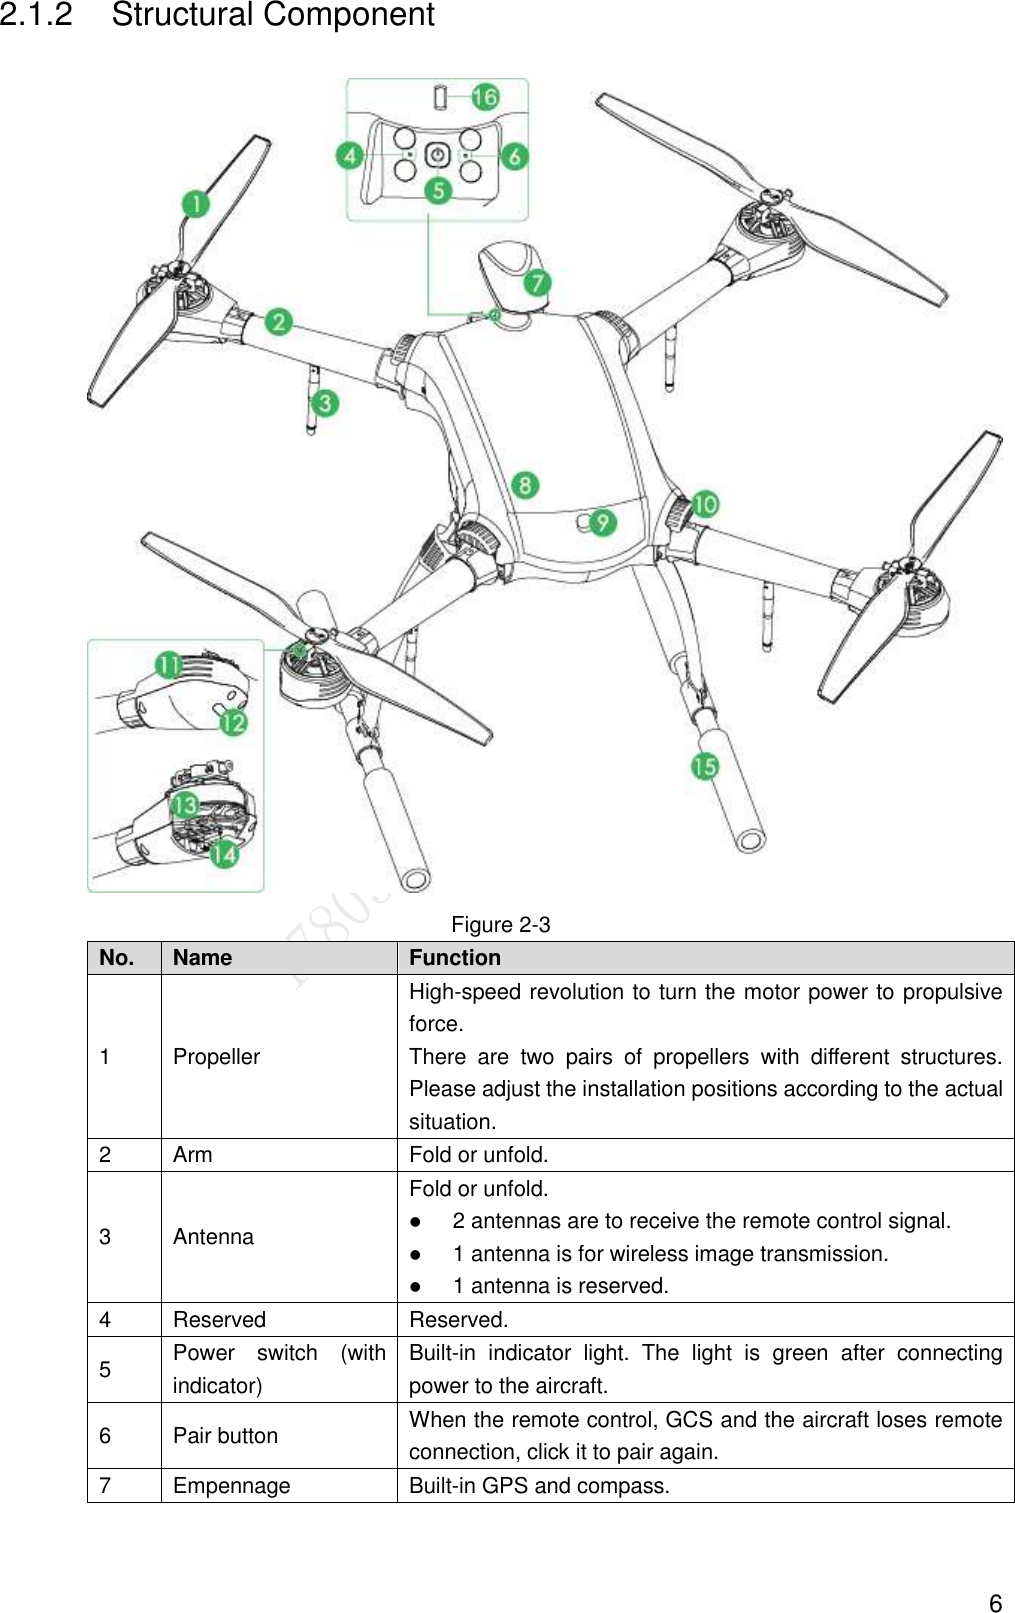  6 2.1.2  Structural Component  Figure 2-3 No. Name Function   1 Propeller High-speed revolution to turn the motor power to propulsive force.   There  are  two  pairs  of  propellers  with  different  structures. Please adjust the installation positions according to the actual situation. 2 Arm Fold or unfold. 3 Antenna Fold or unfold.  2 antennas are to receive the remote control signal.  1 antenna is for wireless image transmission.  1 antenna is reserved. 4 Reserved Reserved. 5 Power  switch  (with indicator) Built-in  indicator  light.  The  light  is  green  after  connecting power to the aircraft. 6 Pair button When the remote control, GCS and the aircraft loses remote connection, click it to pair again. 7 Empennage Built-in GPS and compass.   